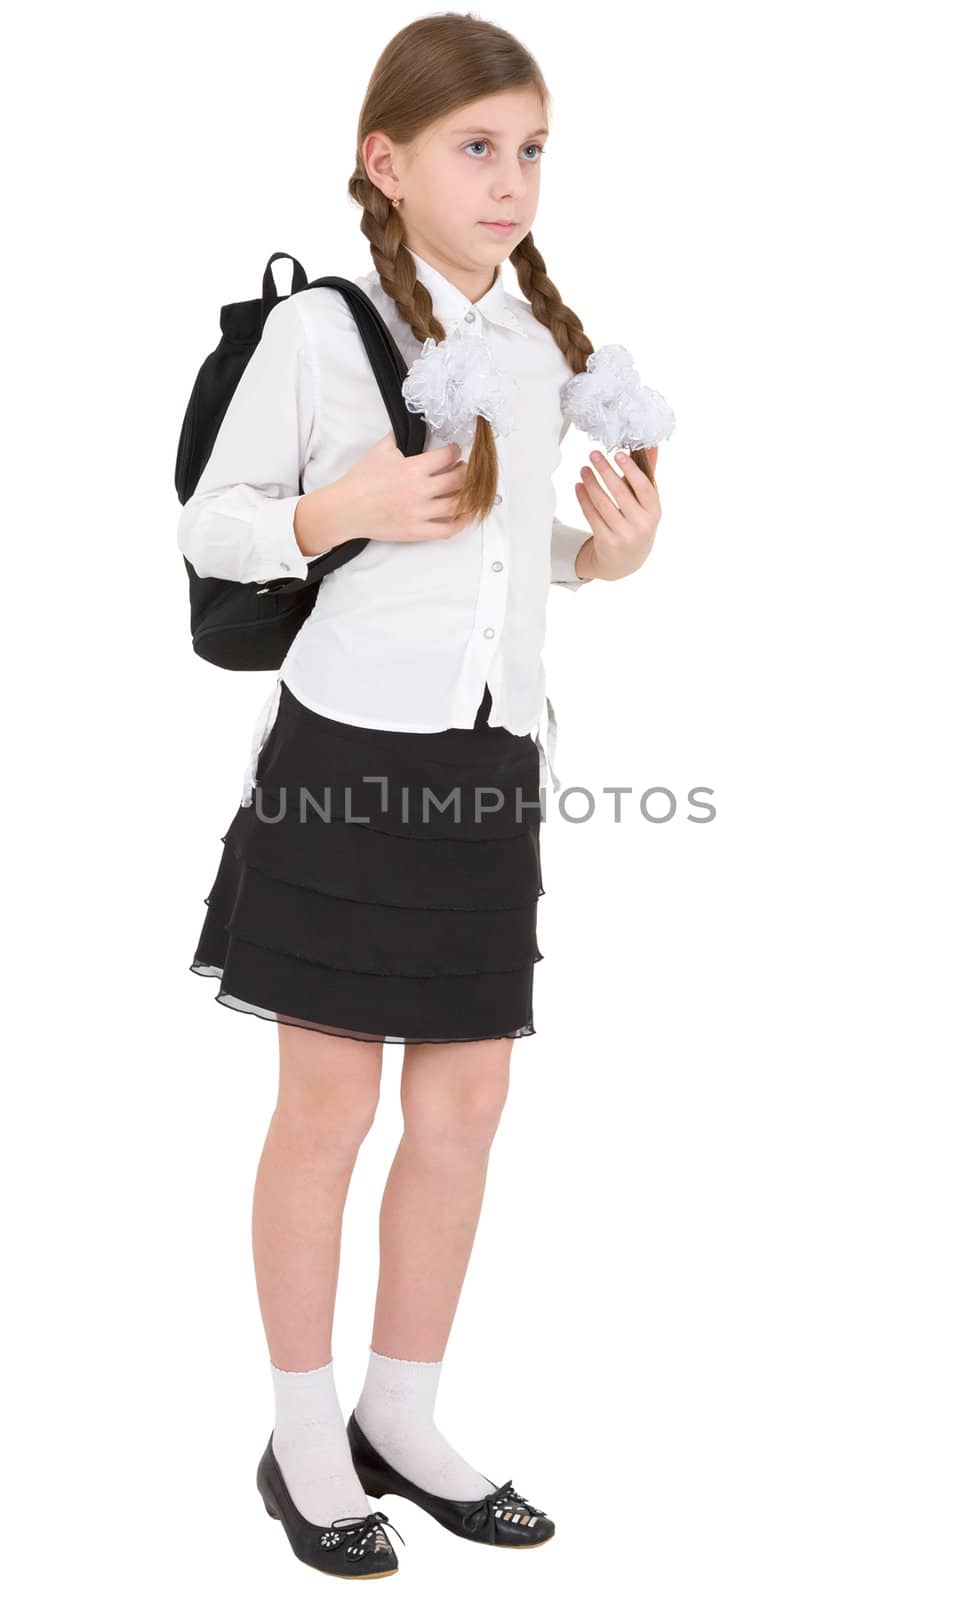 Schoolgirl with black satchel on the white background